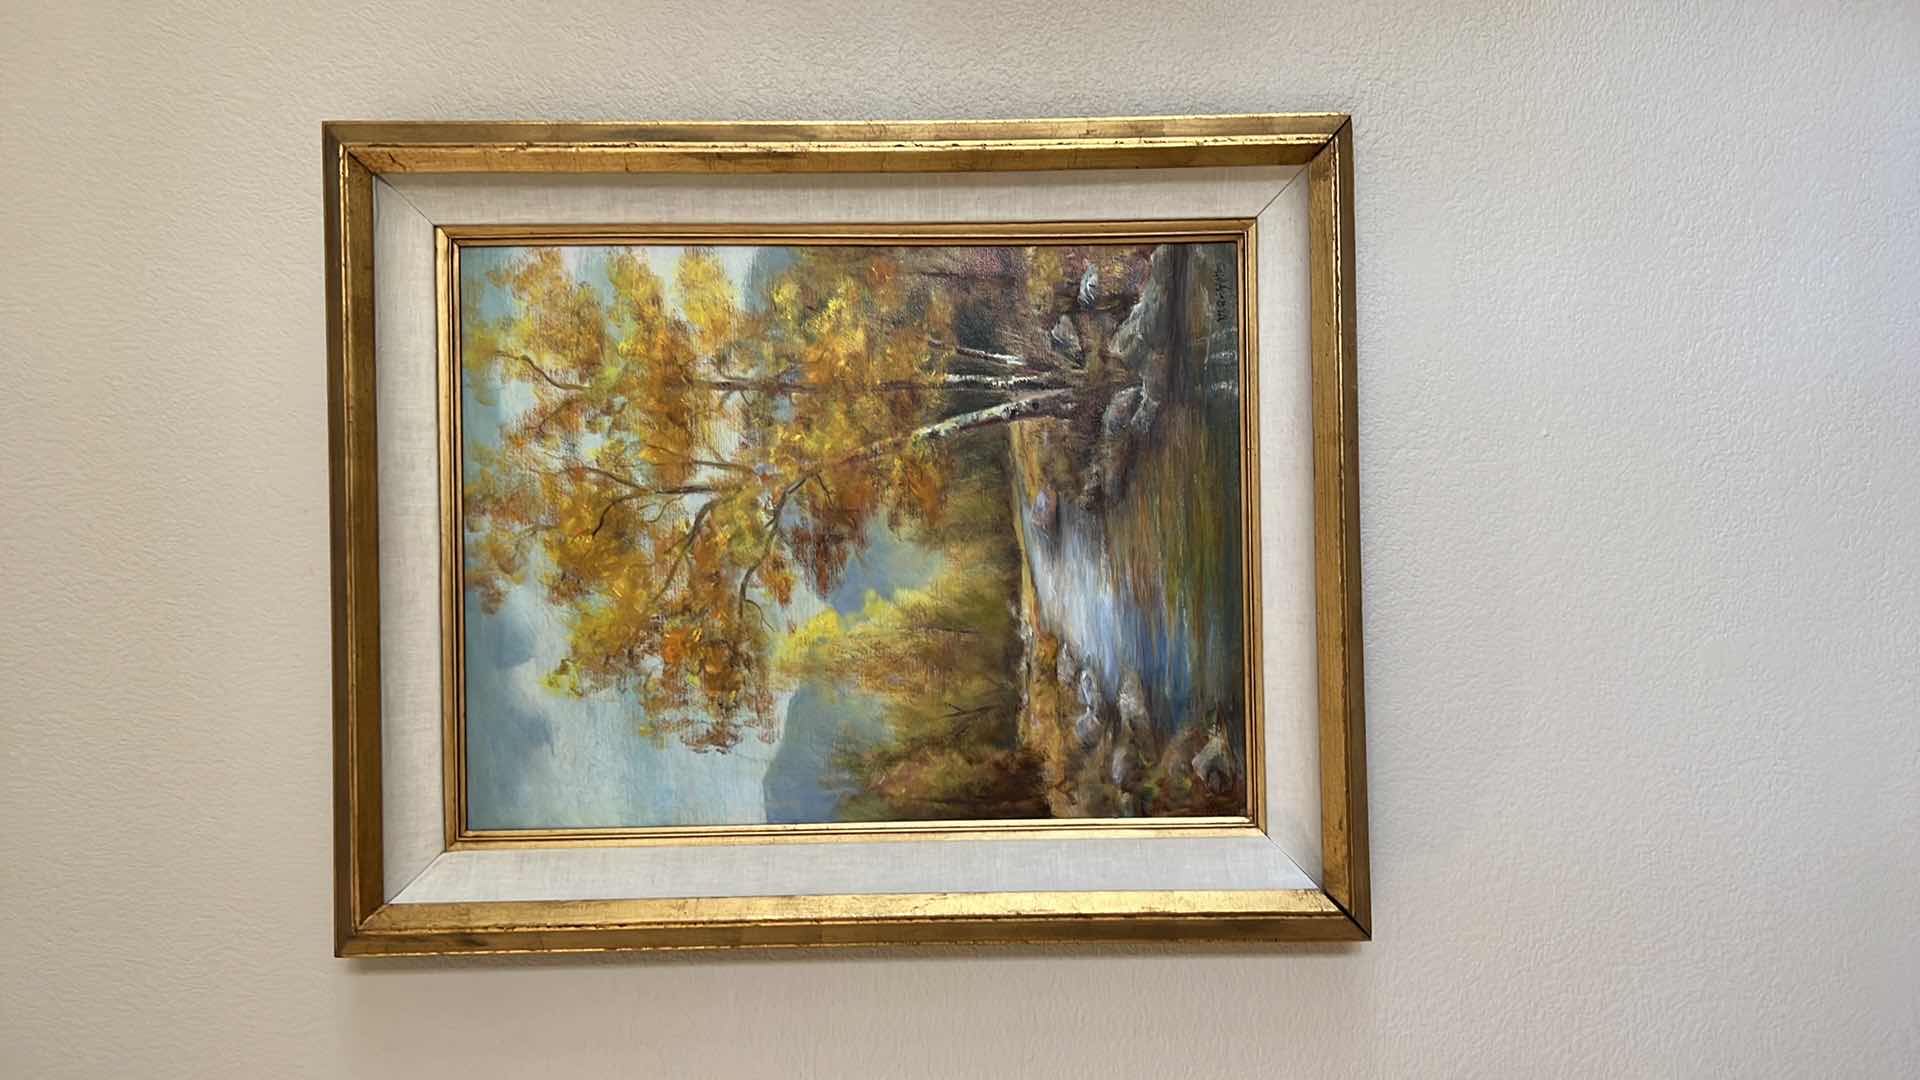 Photo 1 of VINTAGE GOLD FRAMED SCENERY OIL PAINTING SIGNED BY M GRIFFIT ARTIST 25”x30”